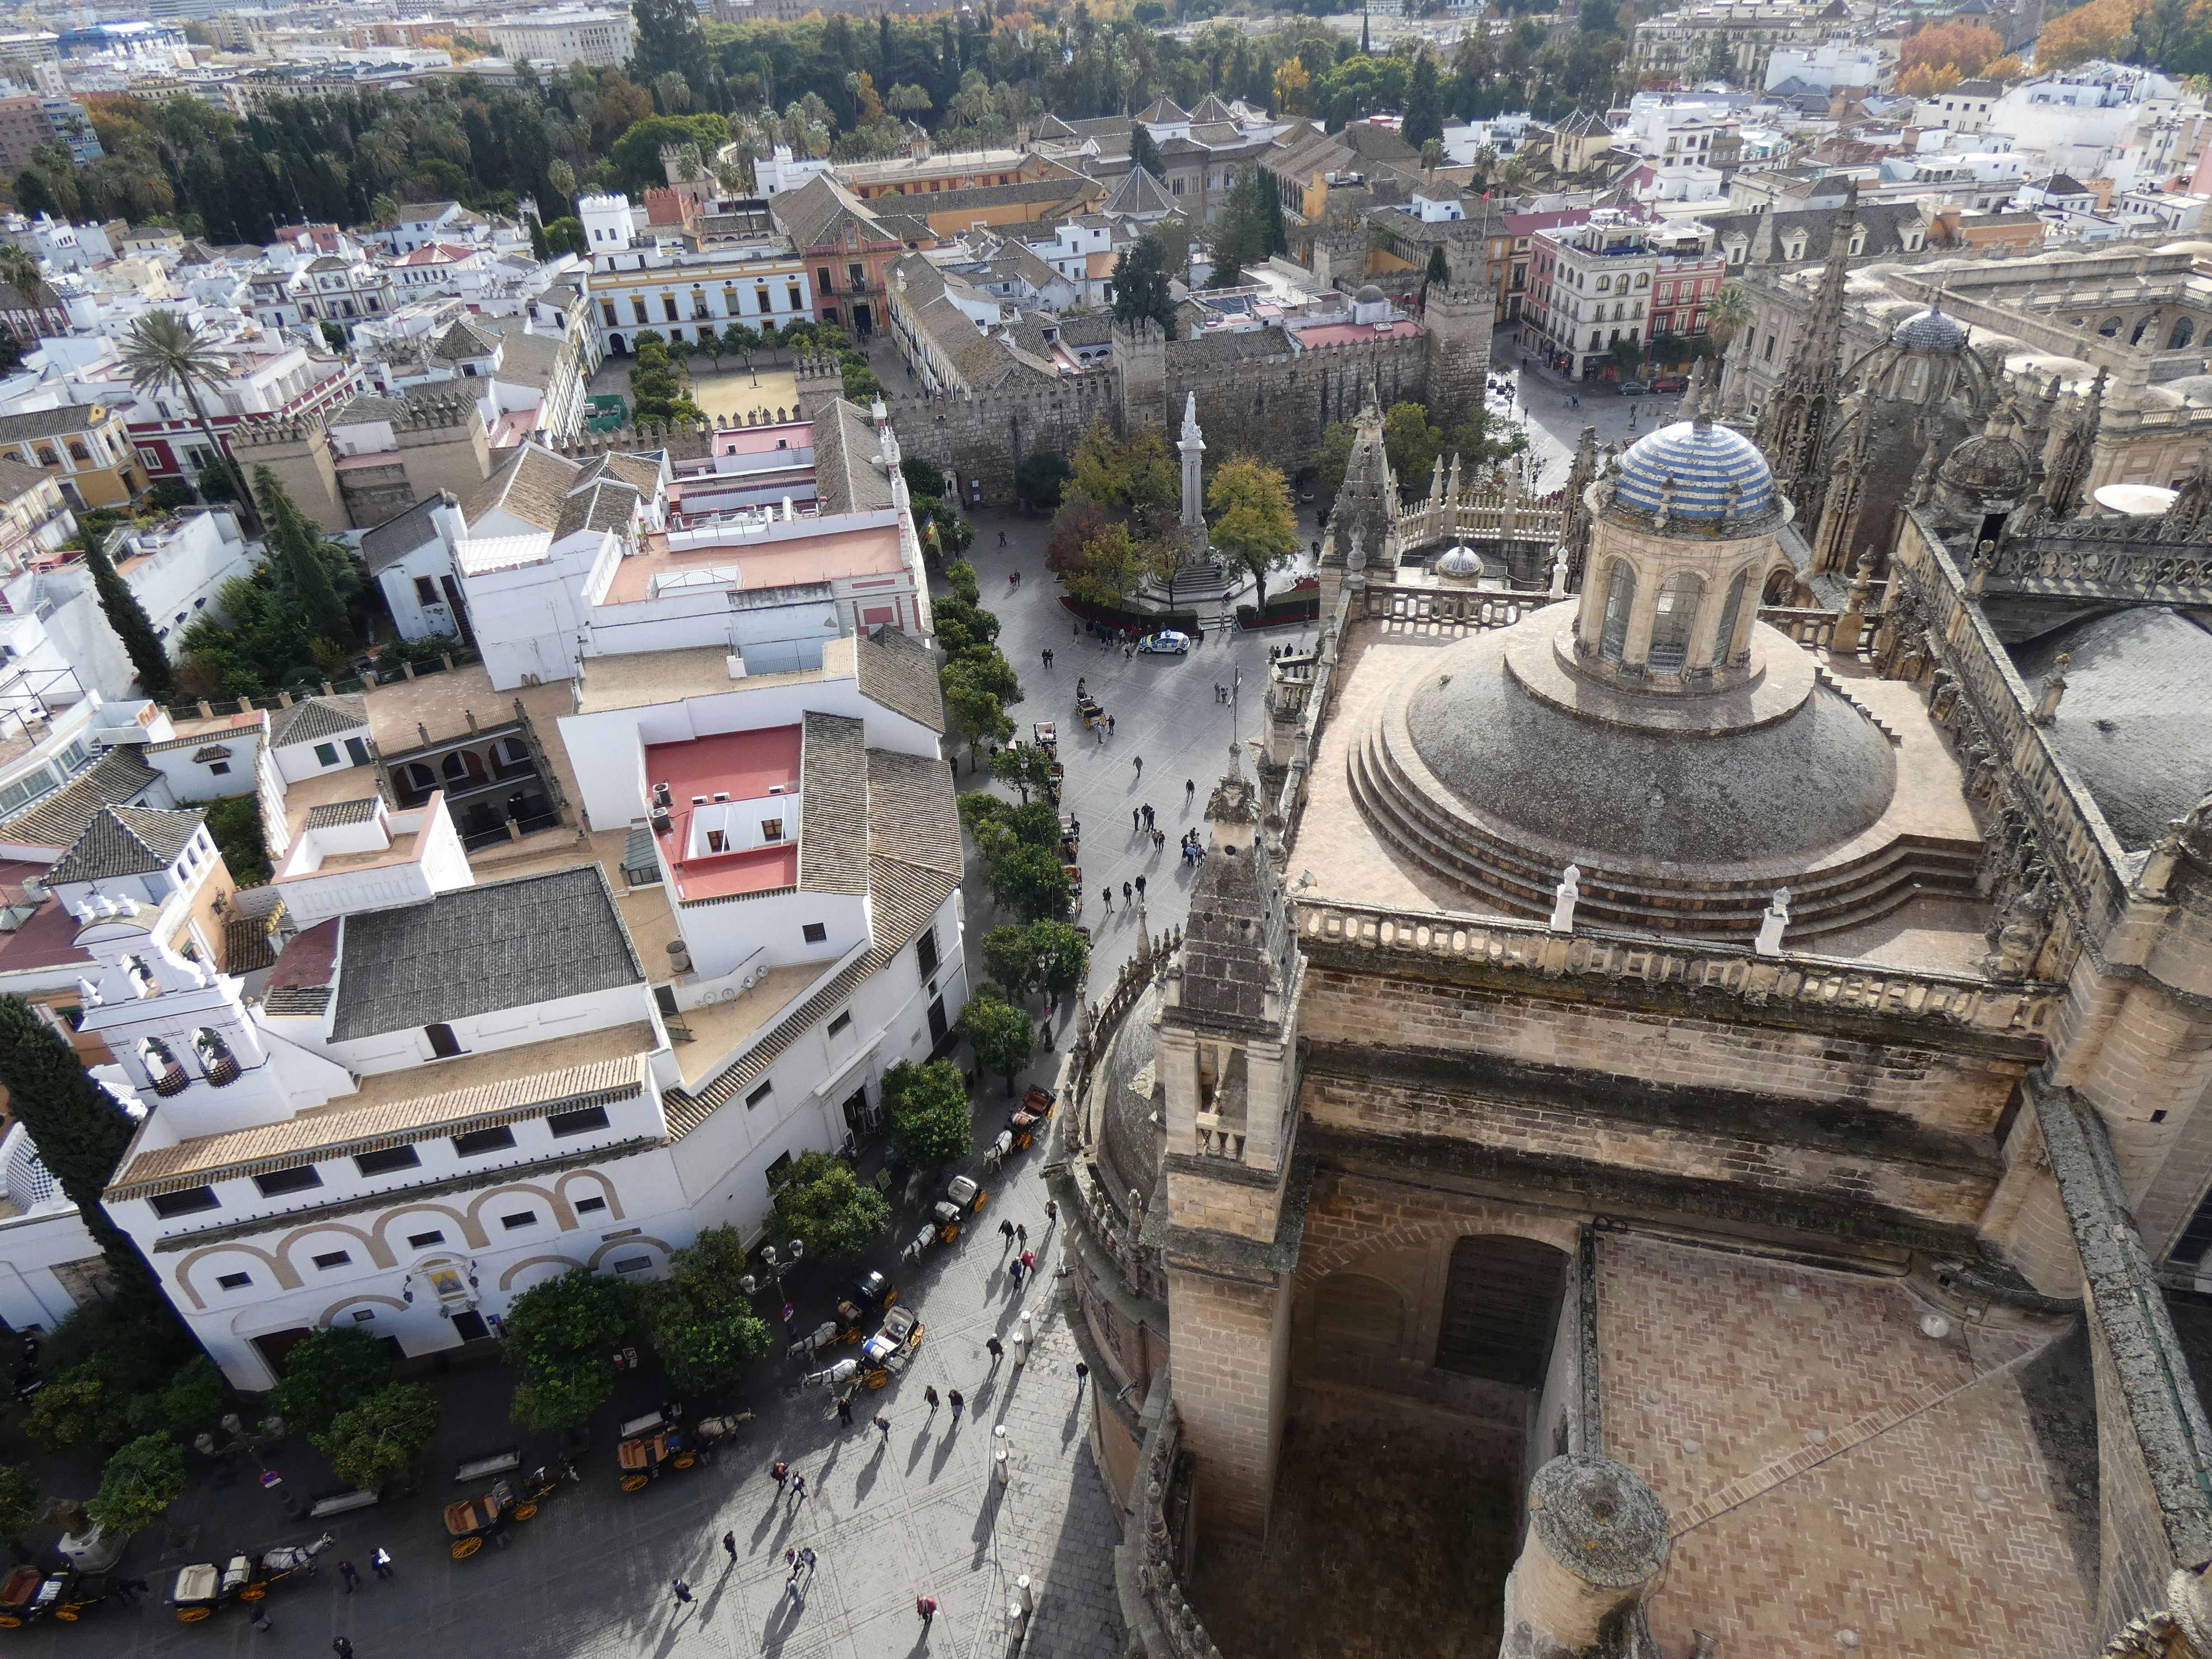 View of Seville streets from the top of the cathedral